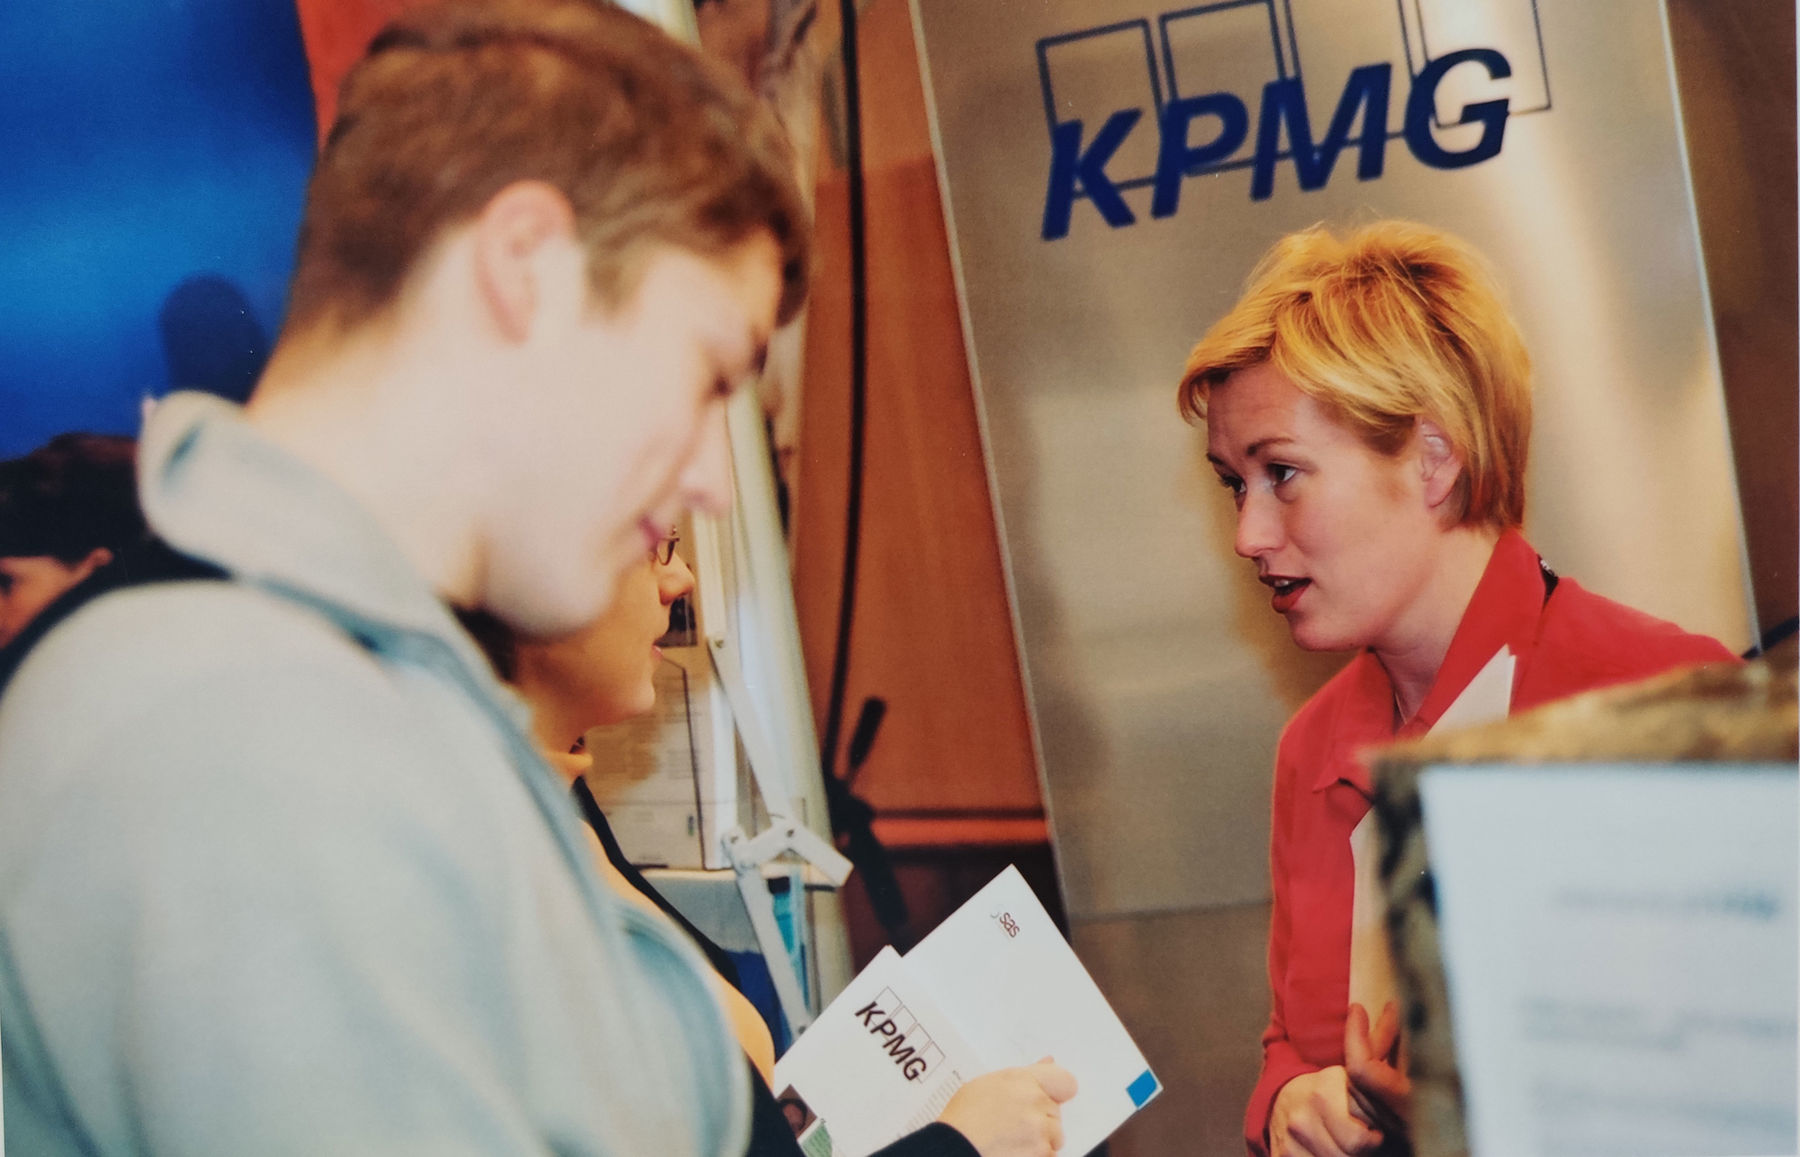 An old photo of two people close up. One is reading a broschure and another has her mouth open. KPMG logo in the background.